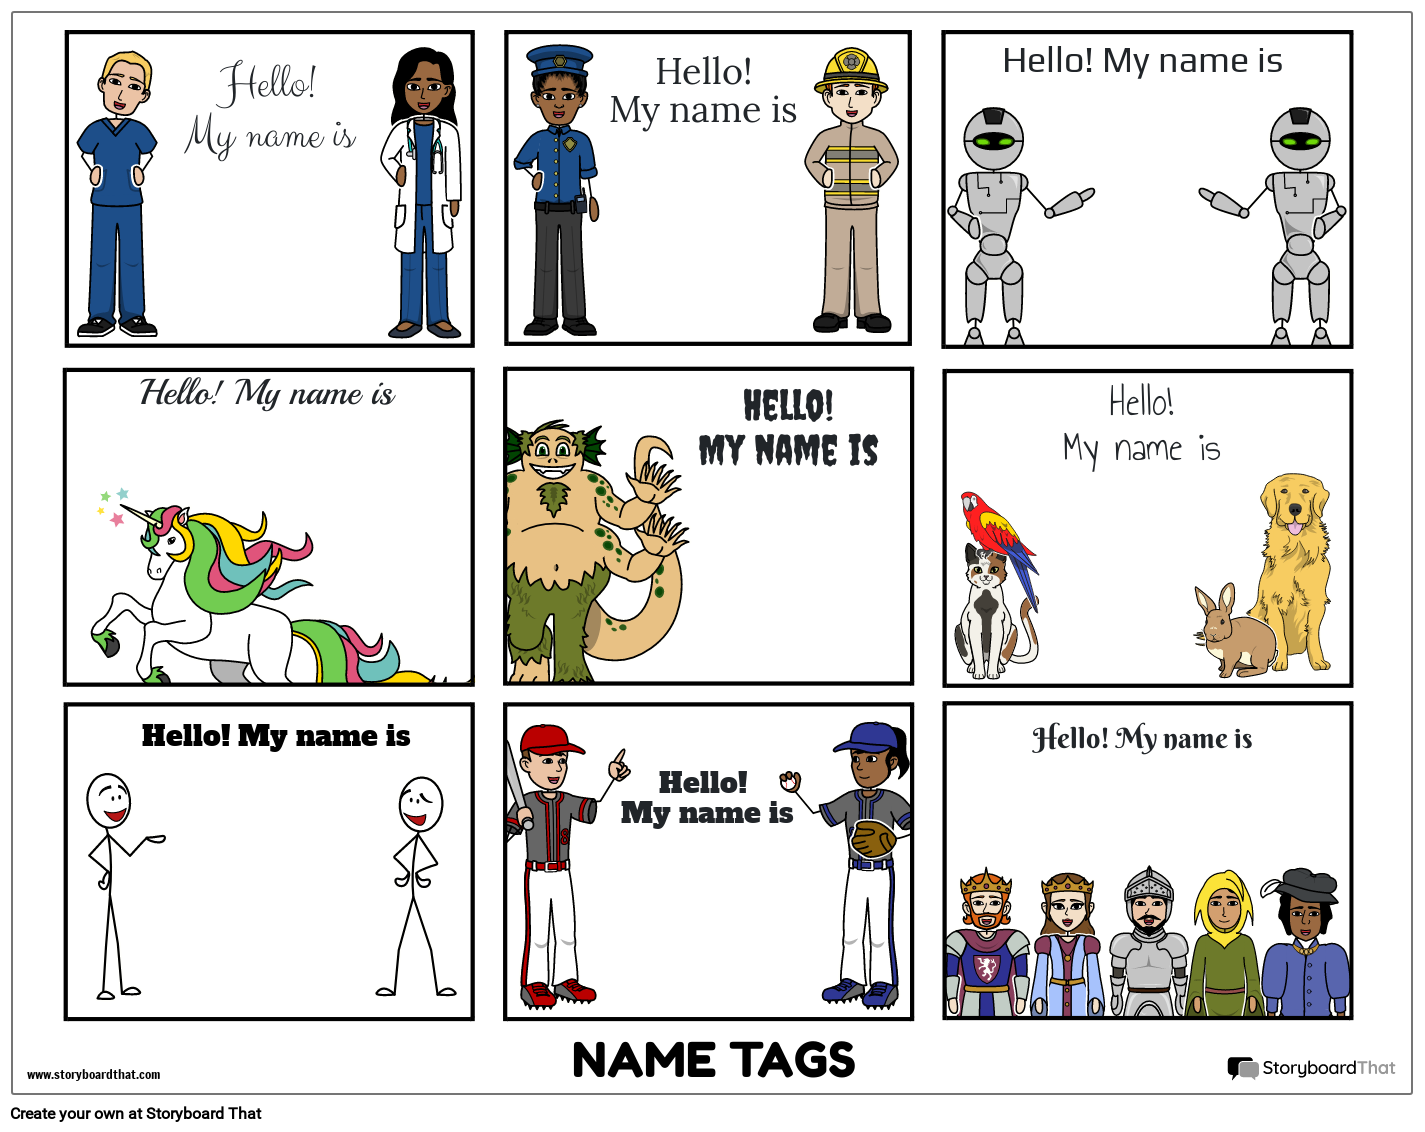 new-create-page-name-tag-template-3-storyboard